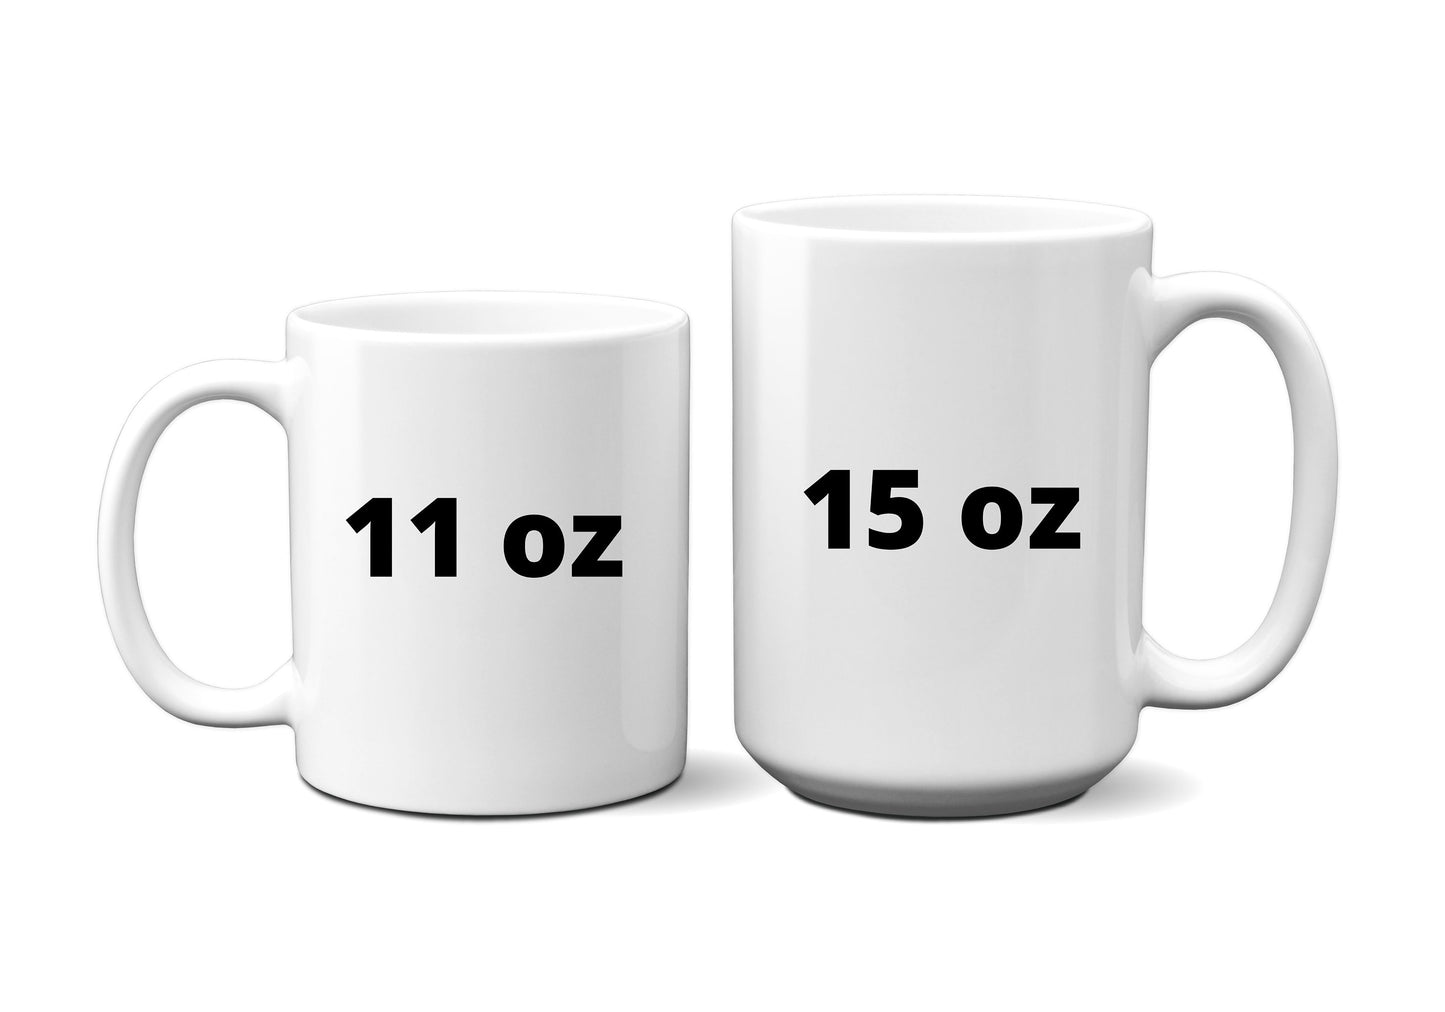 Human beings were not meant to sit in little cubicles | Peter Gibbons Quote Mug | Office Space Mug